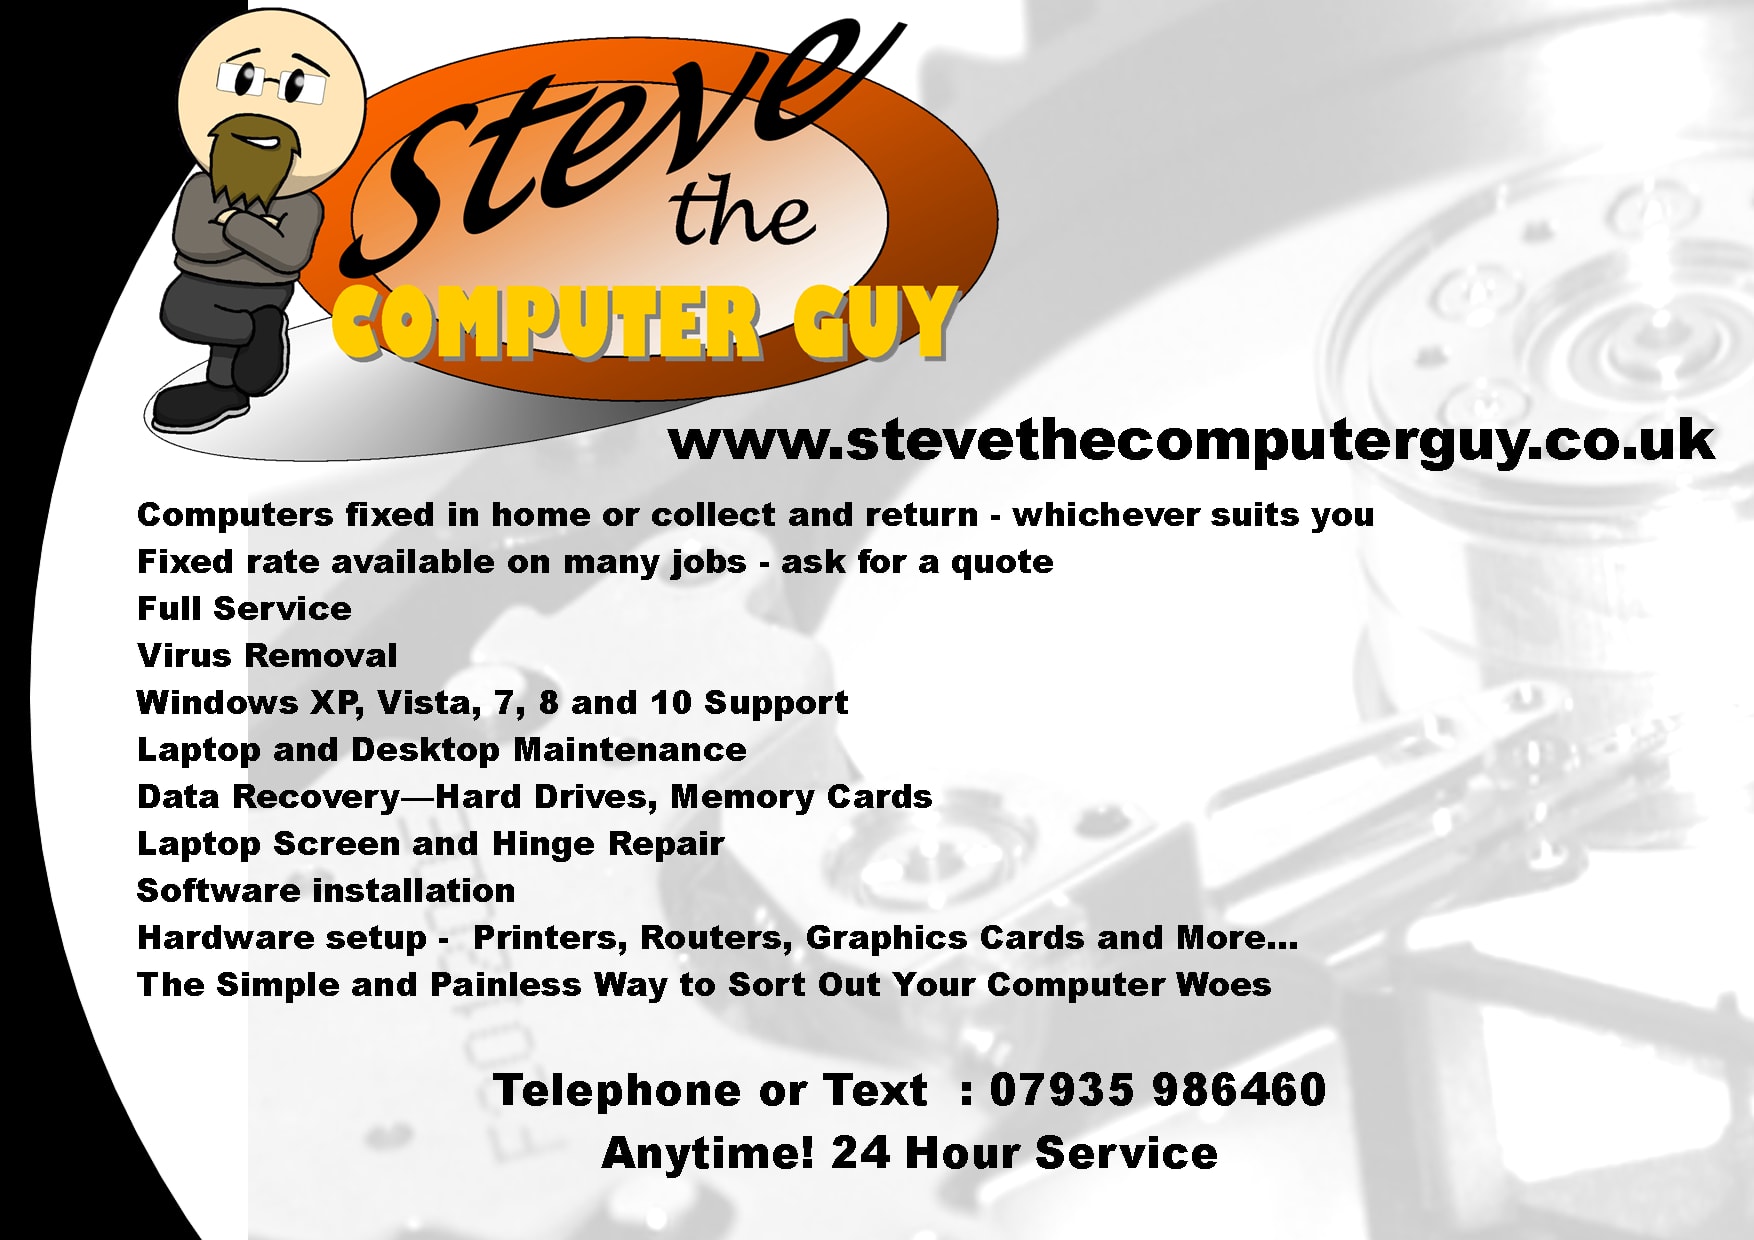 Steve the Computer Guy Inverurie 07935 986460